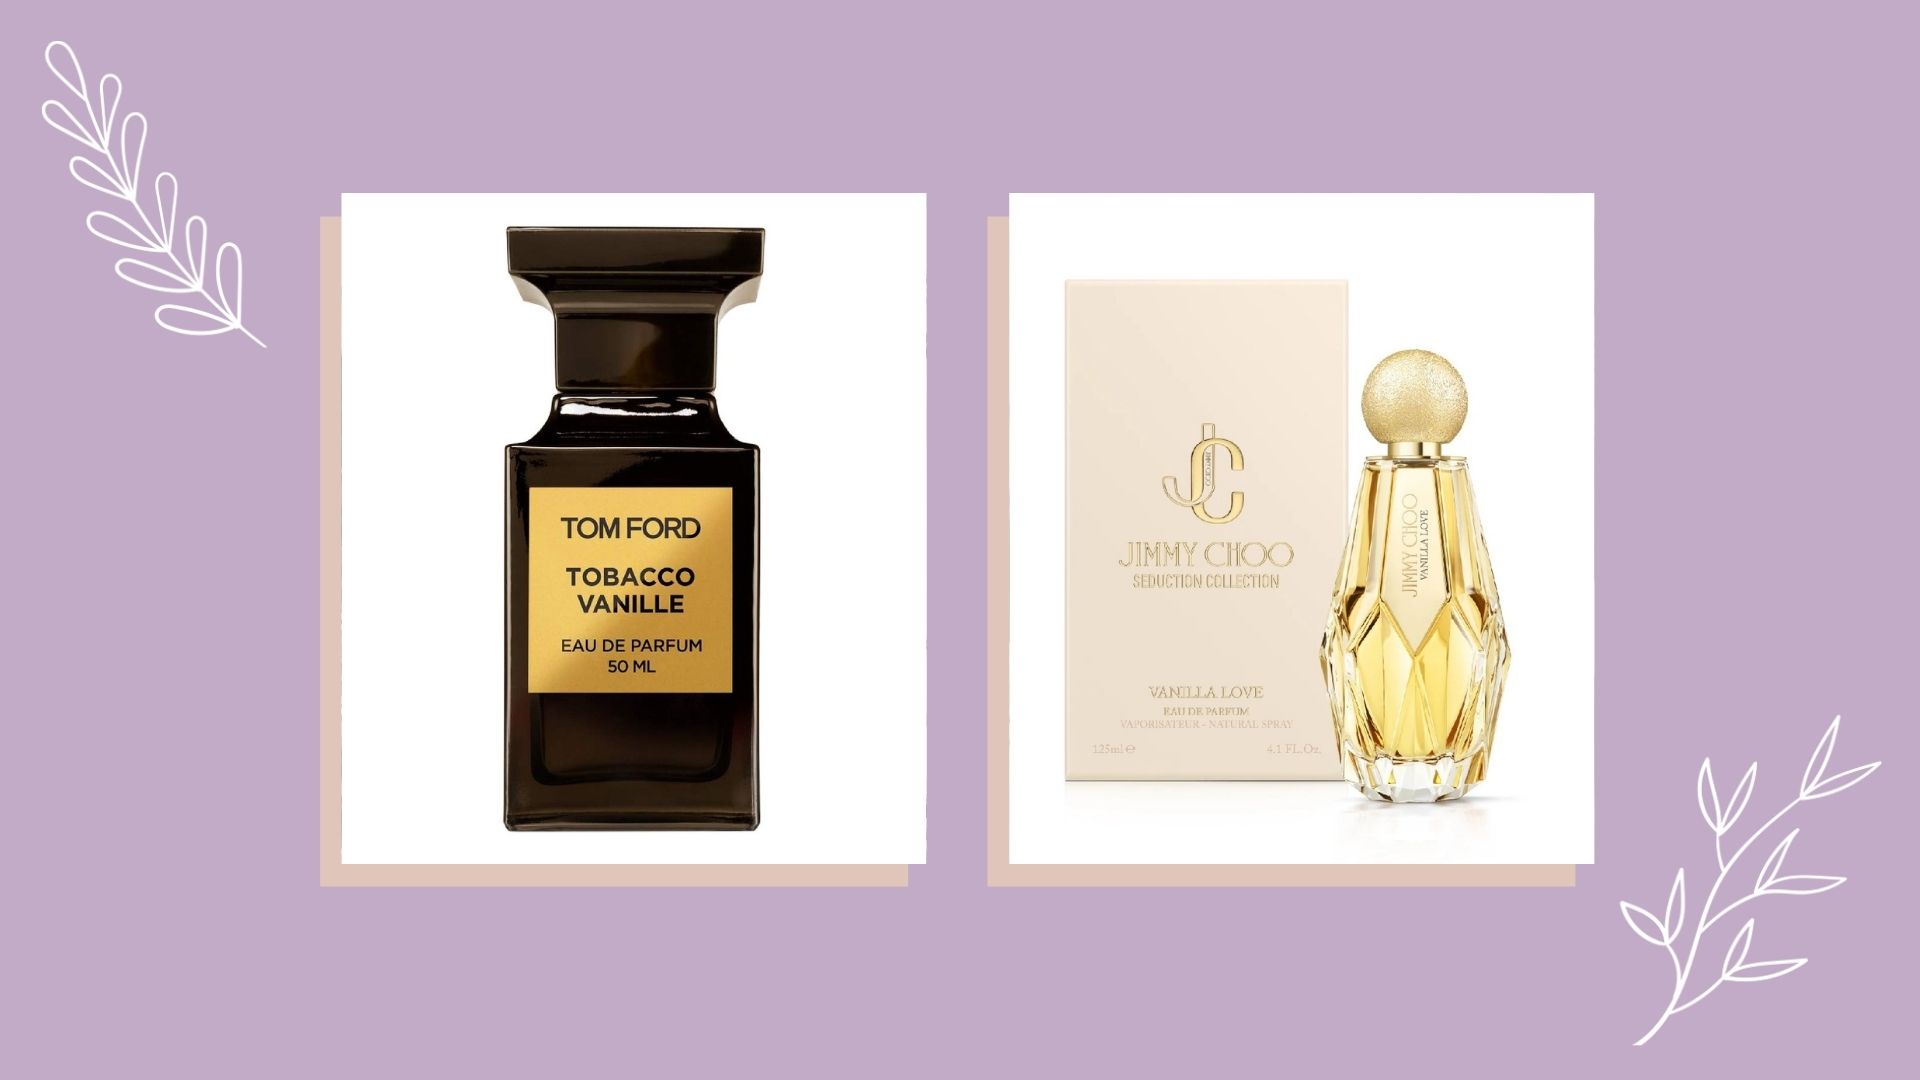 The best vanilla perfumes for every taste, mood and occasion